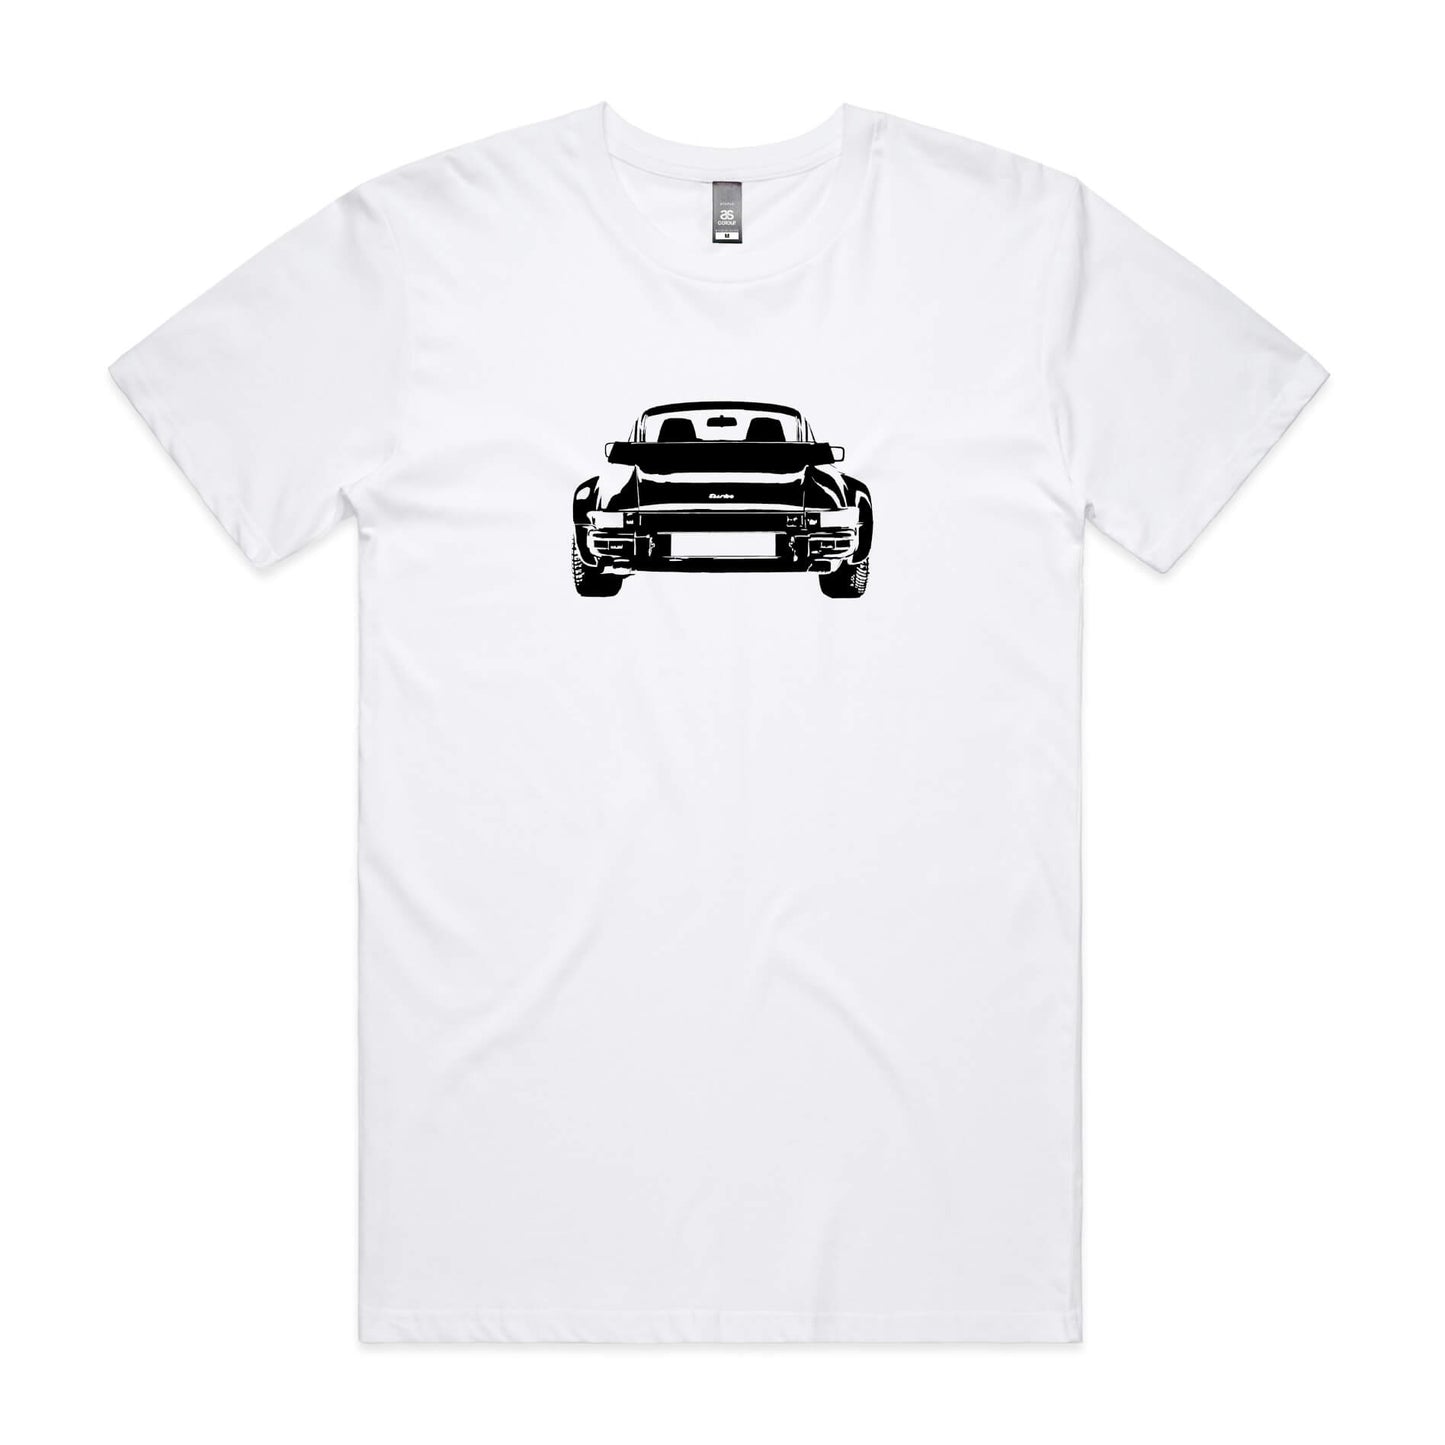 Porsche 911 turbo t-shirt in white with a black car graphic